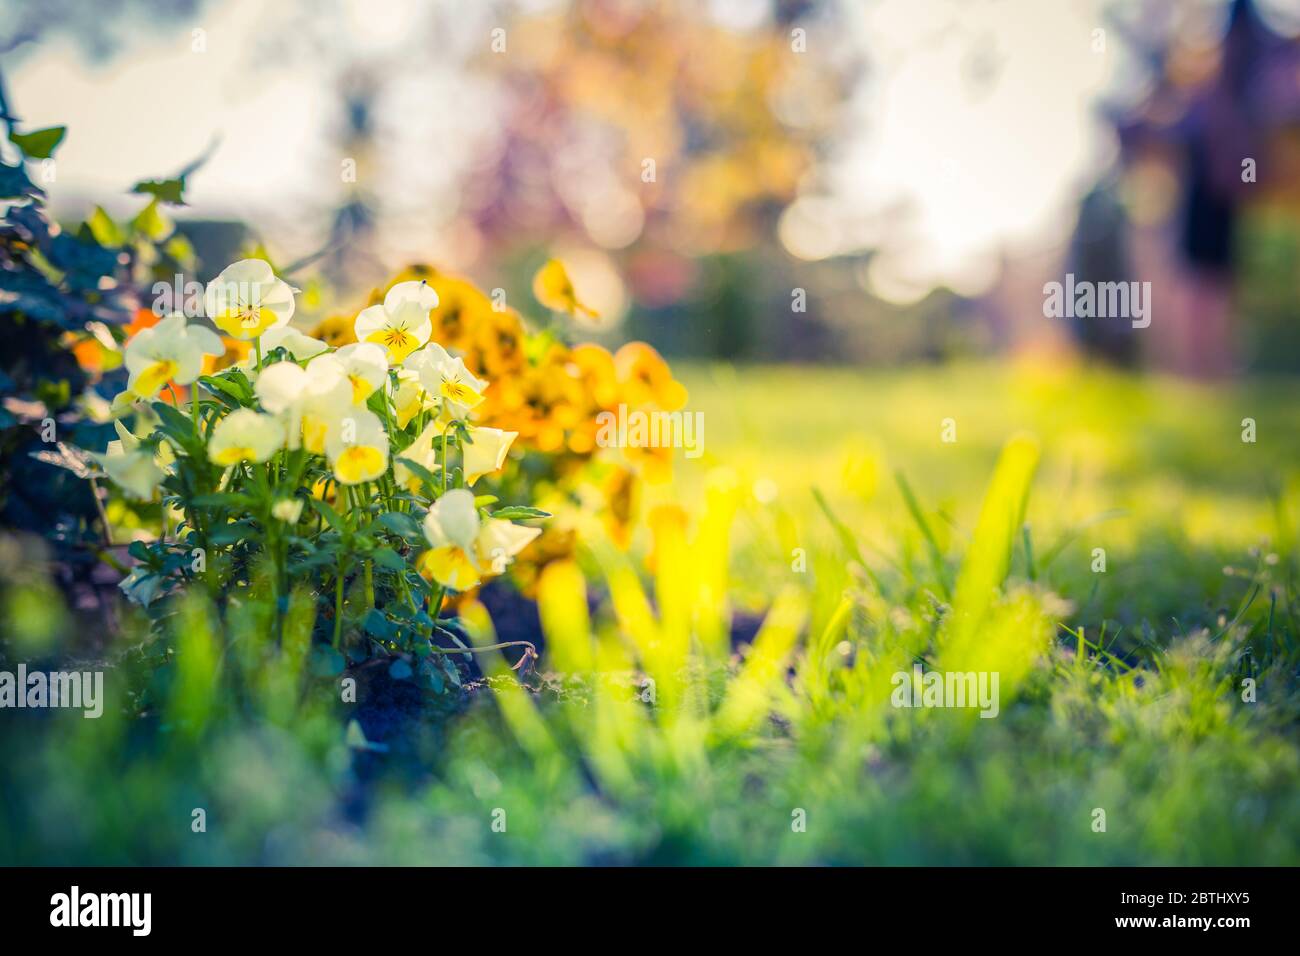 Multicolored flowerbed on a lawn. Blooming flowers with blurred nature meadow. Beautiful colors park or garden floral backdrop, dream nature flowers Stock Photo